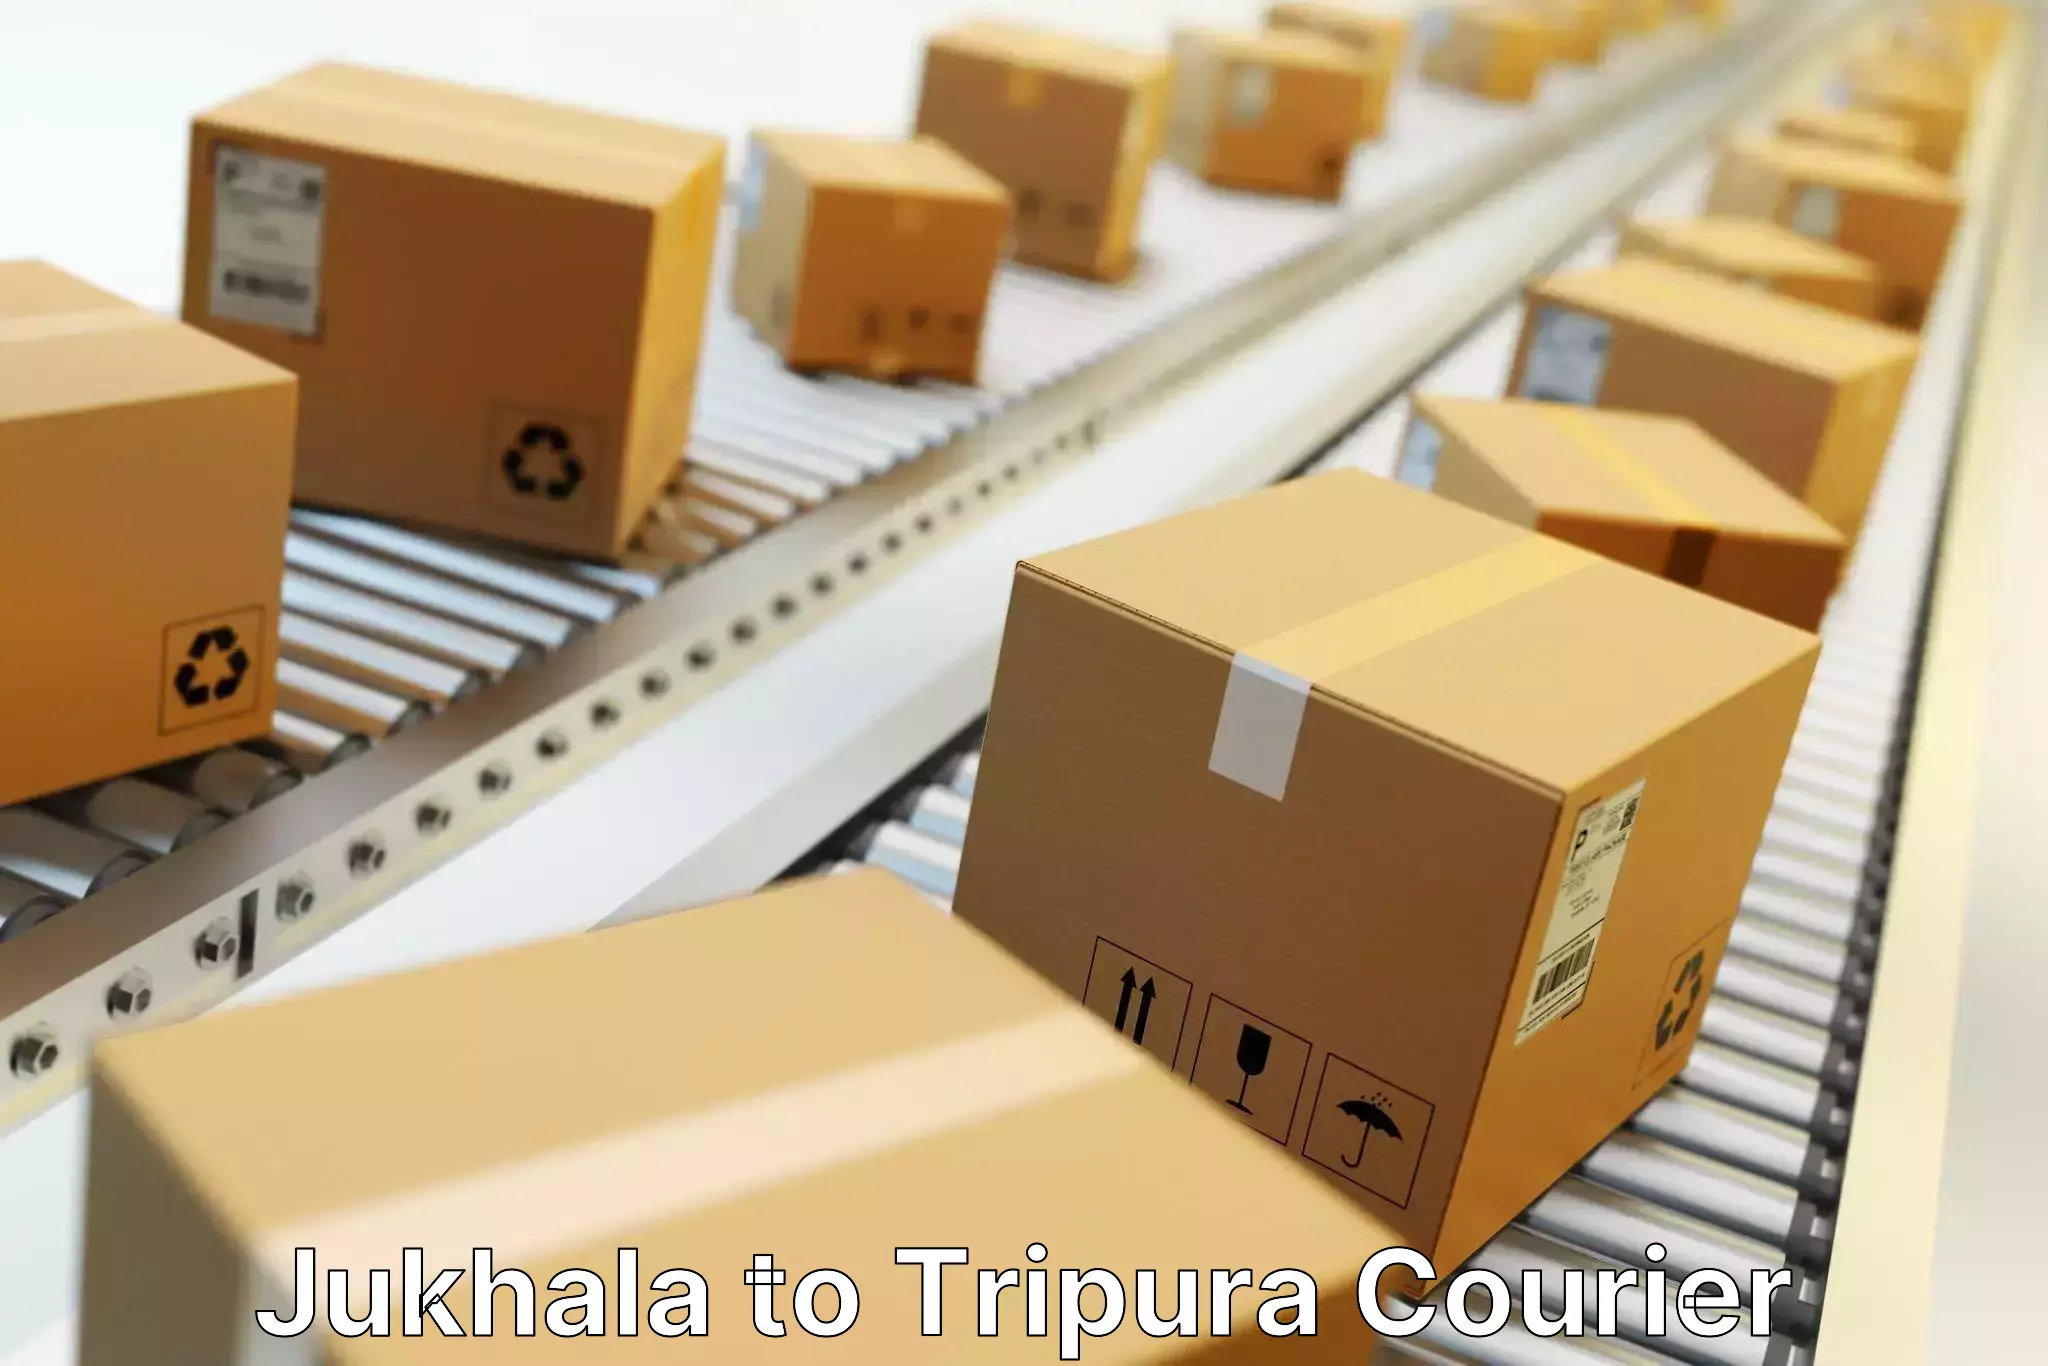 Round-the-clock parcel delivery Jukhala to Tripura